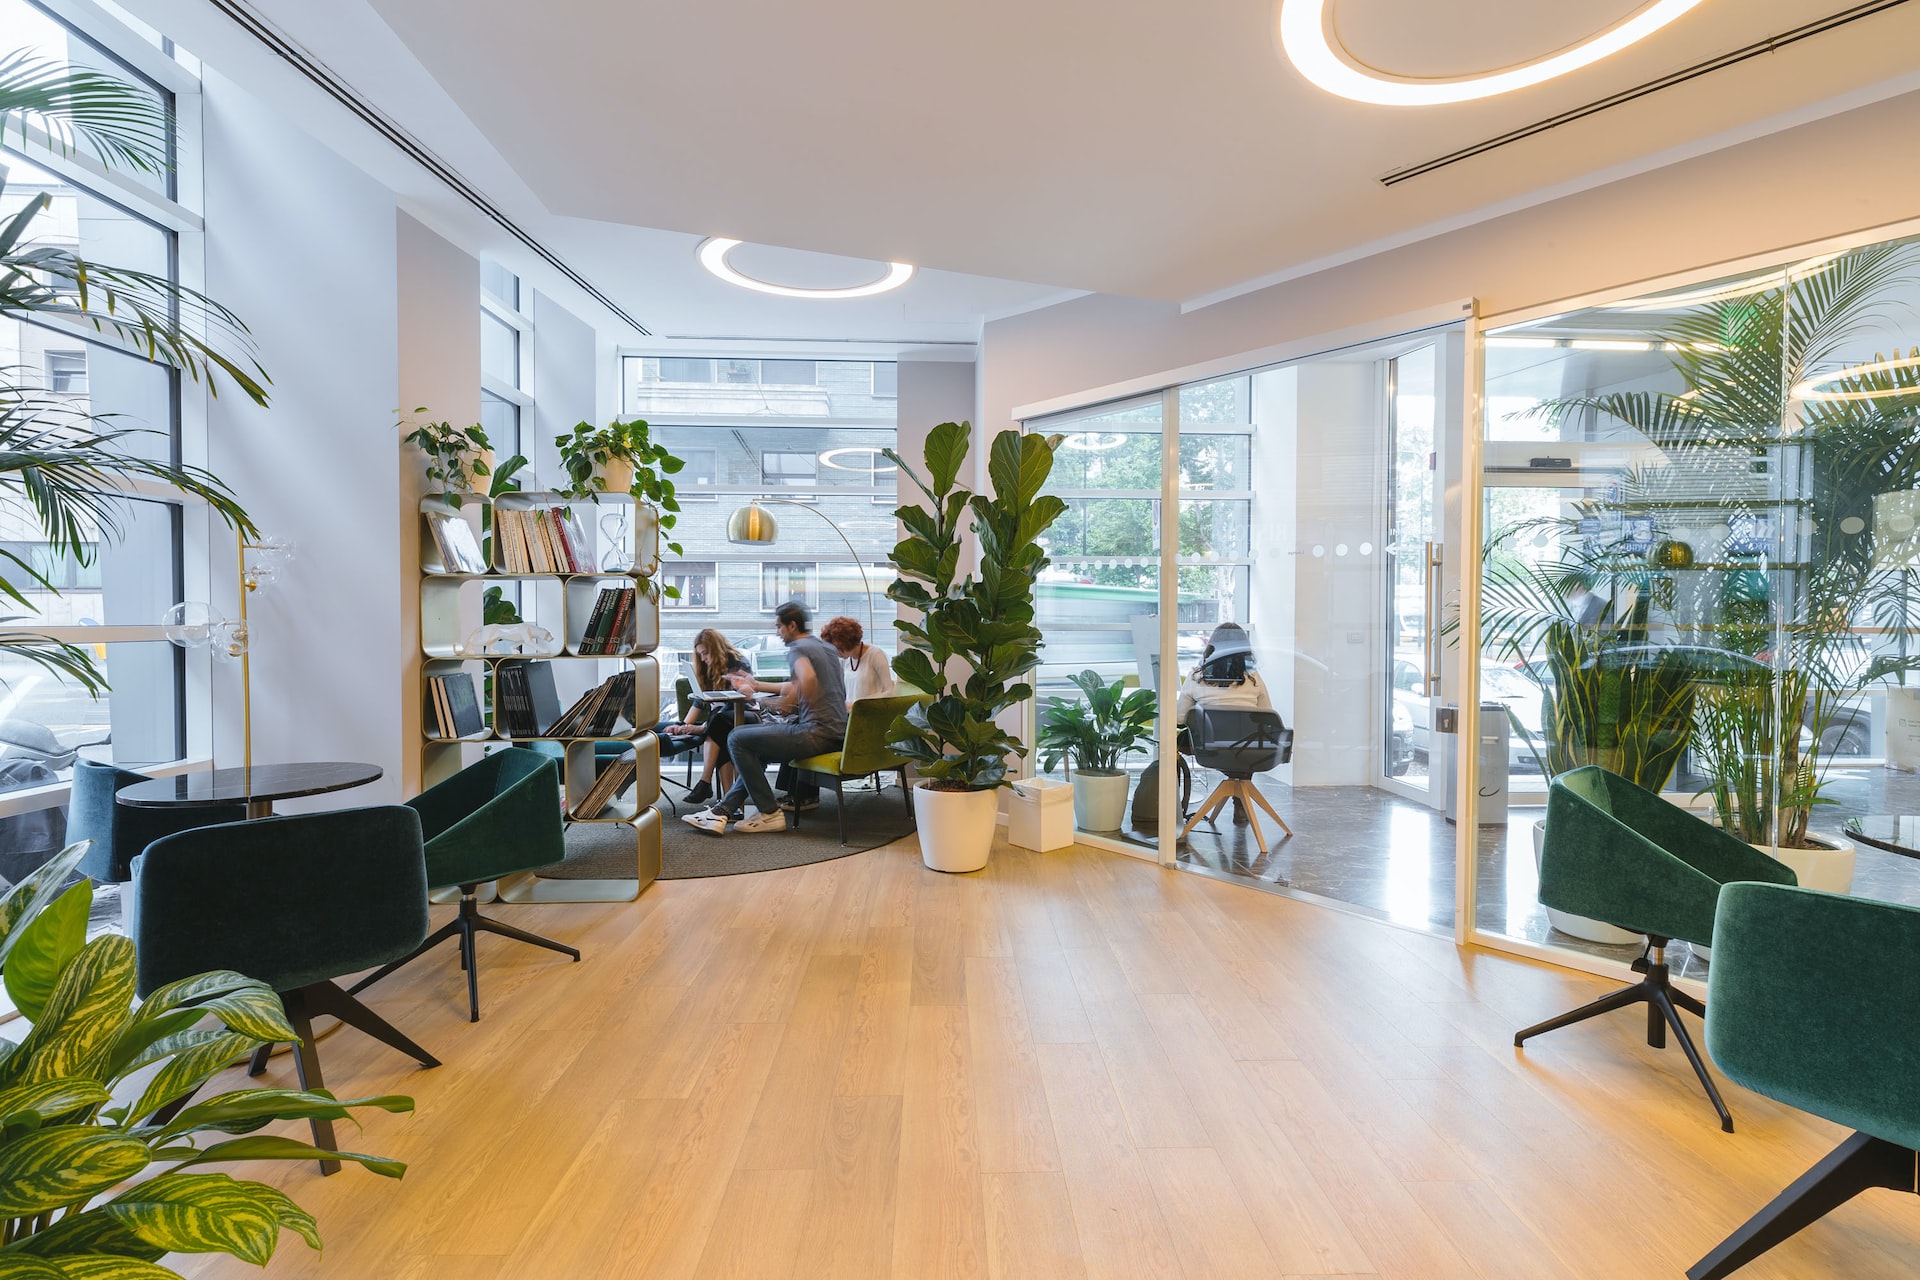 Improving Employee Engagement Strategies With Office Designs